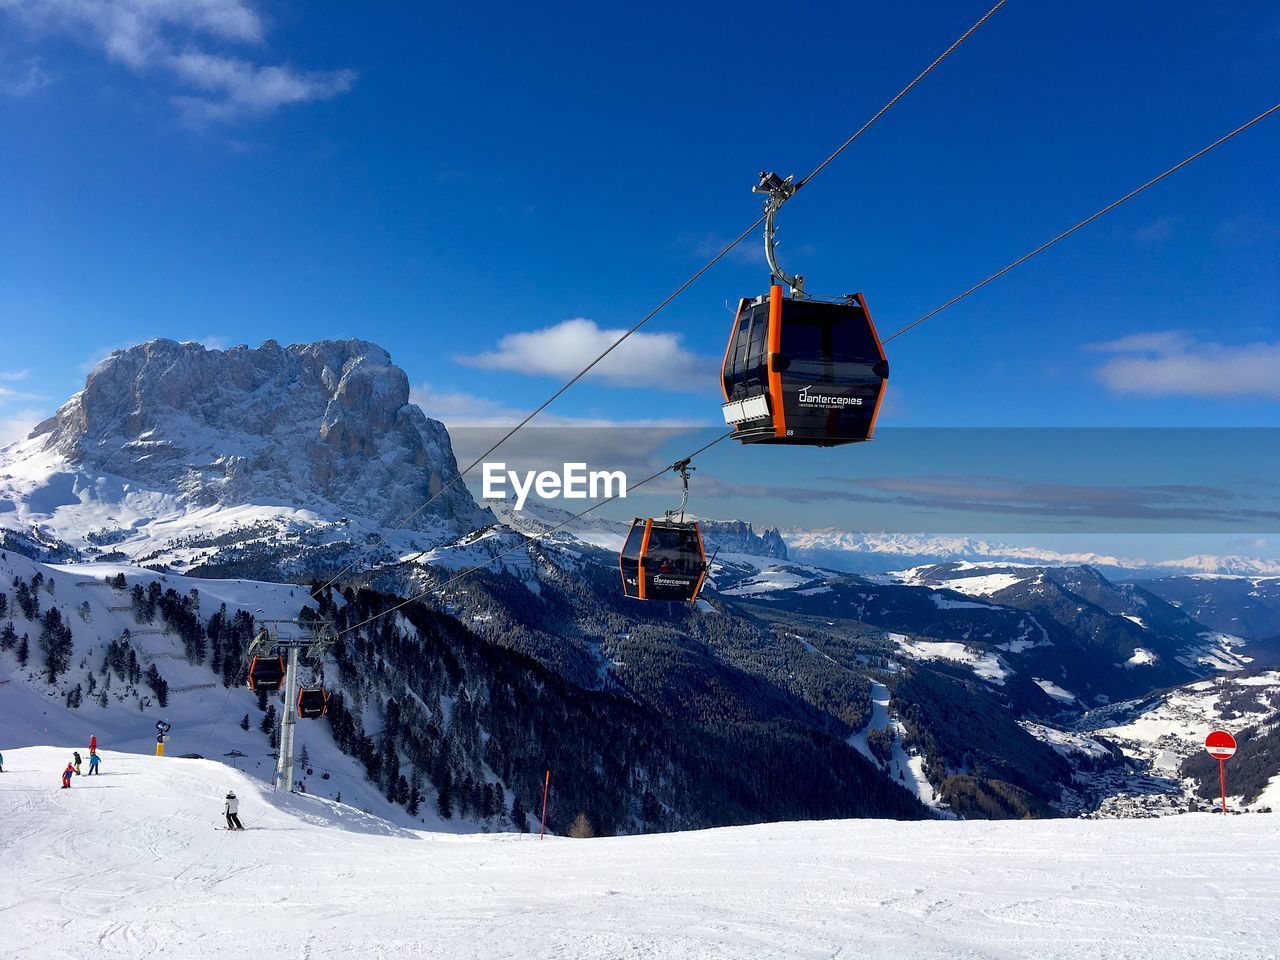 OVERHEAD CABLE CARS OVER SNOW COVERED MOUNTAINS